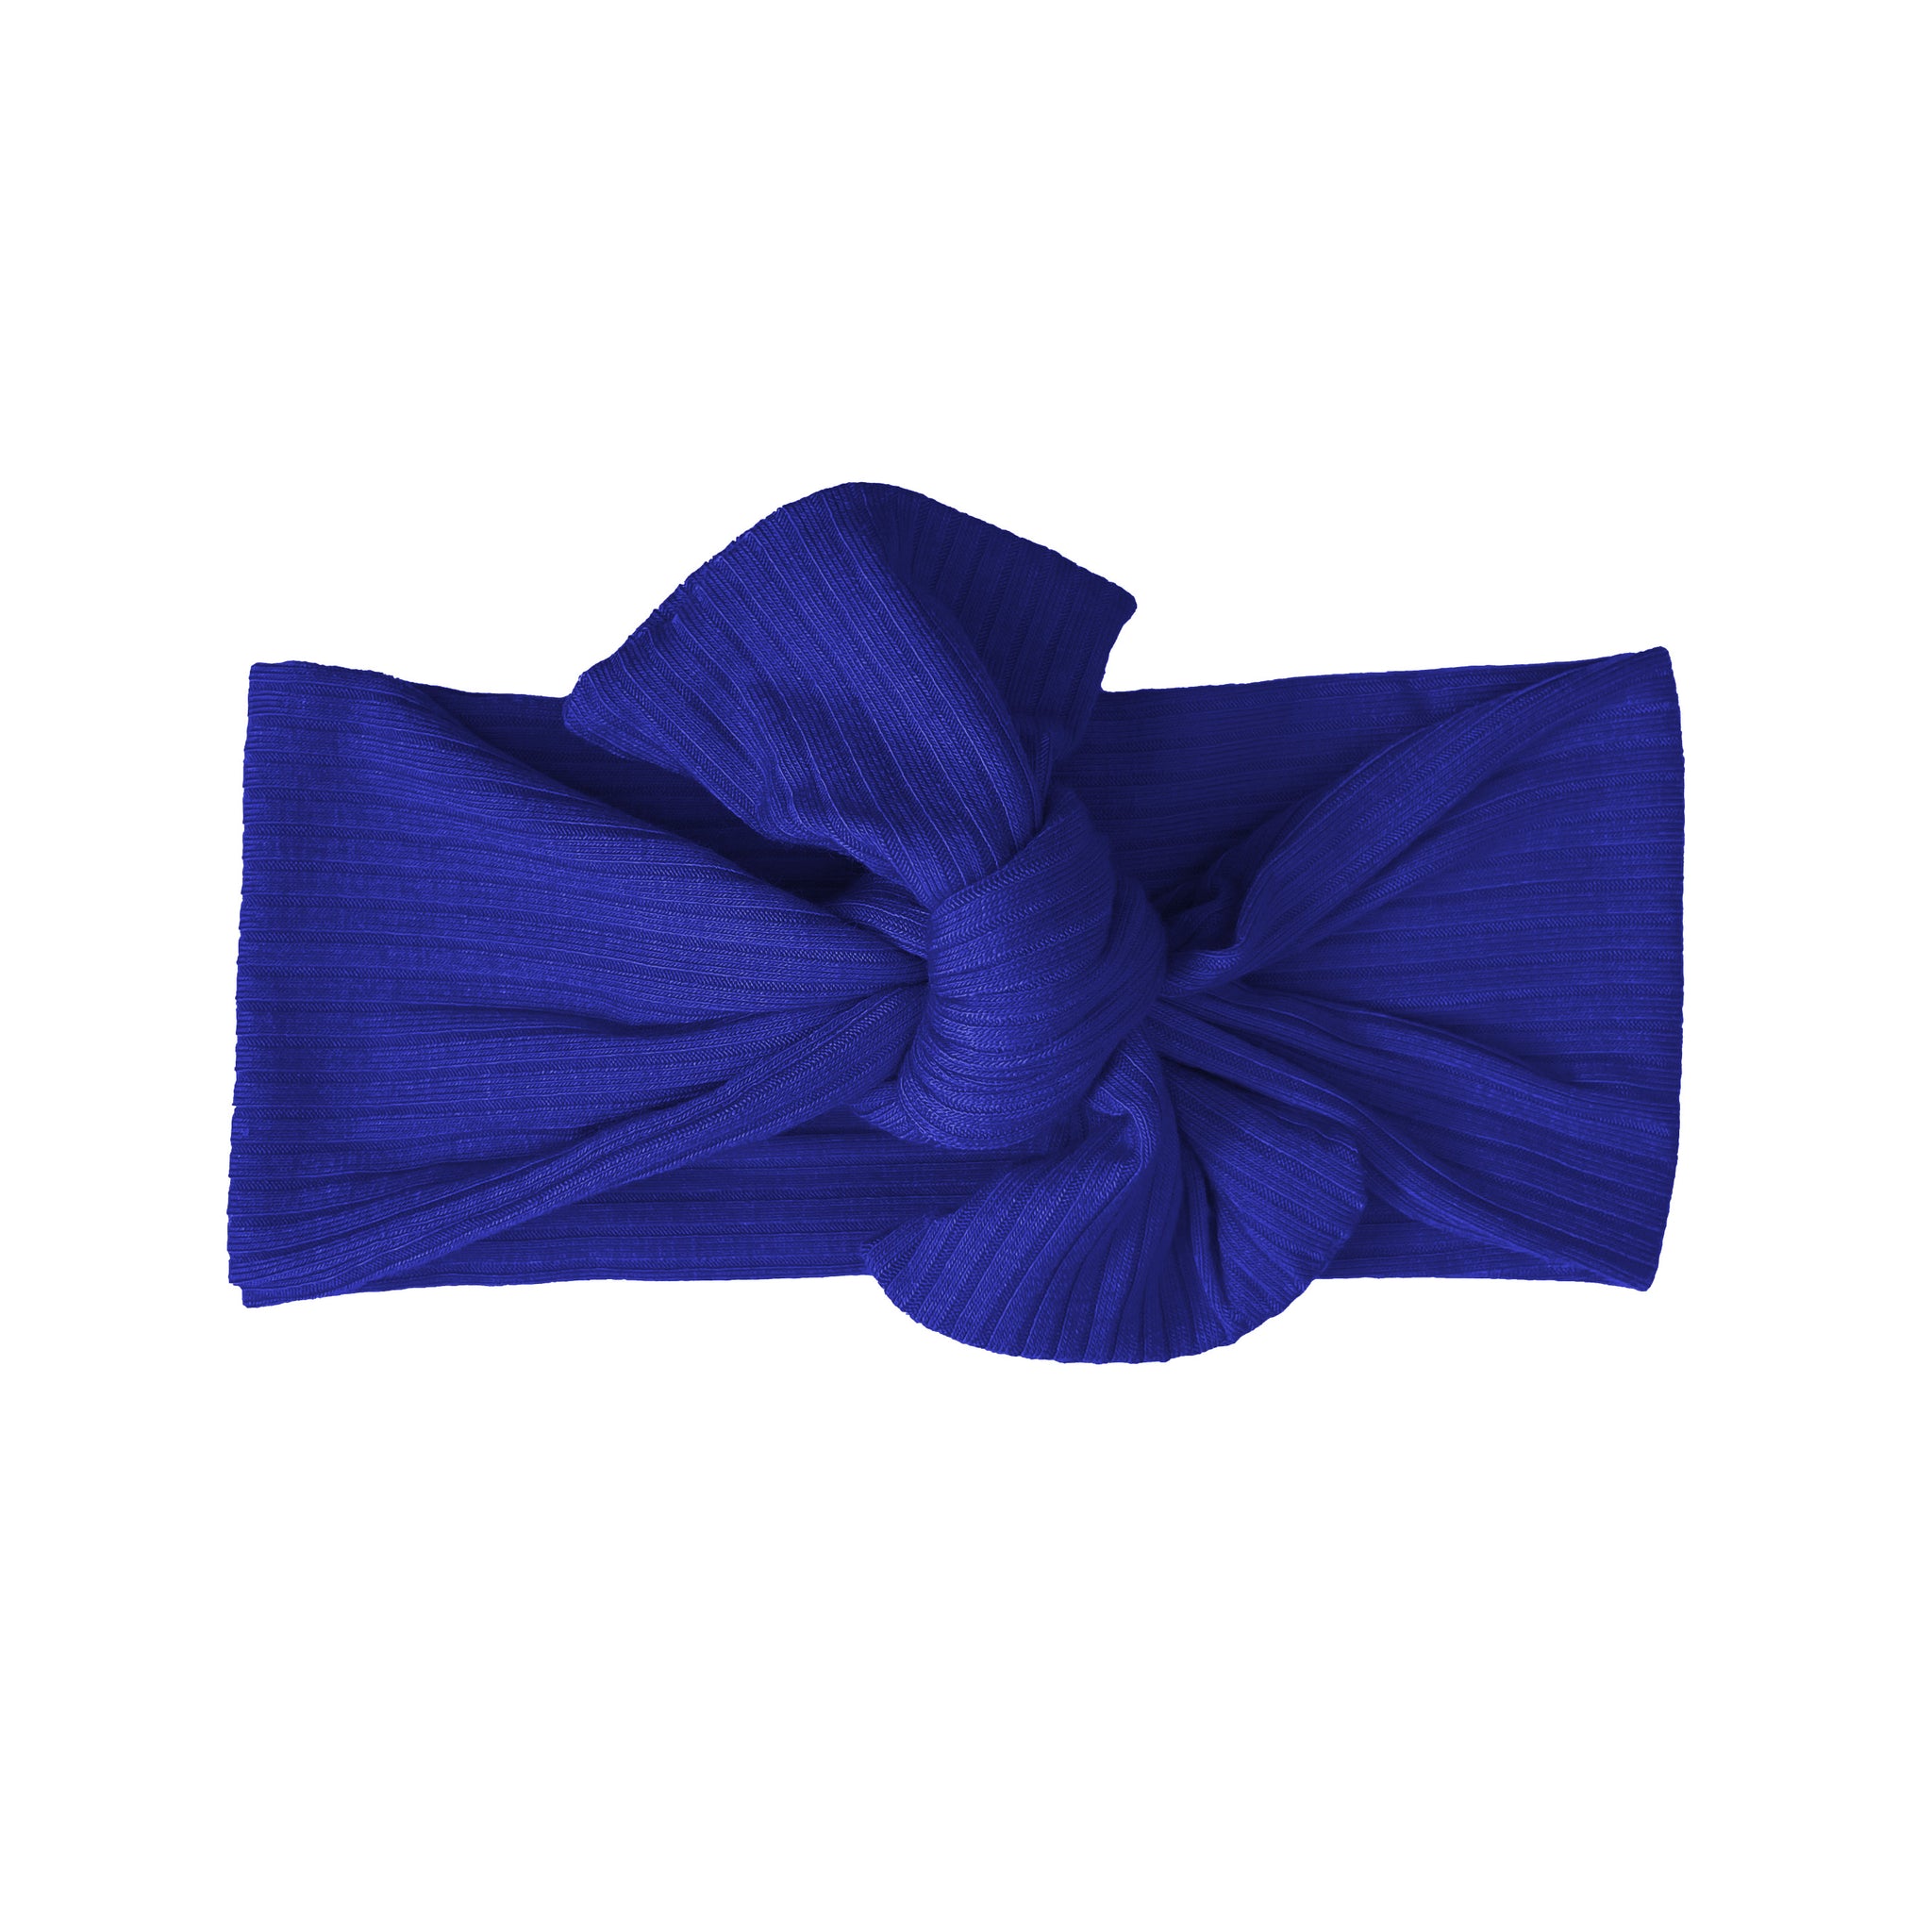 Presley Couture Bow Headband - Cotton Candy